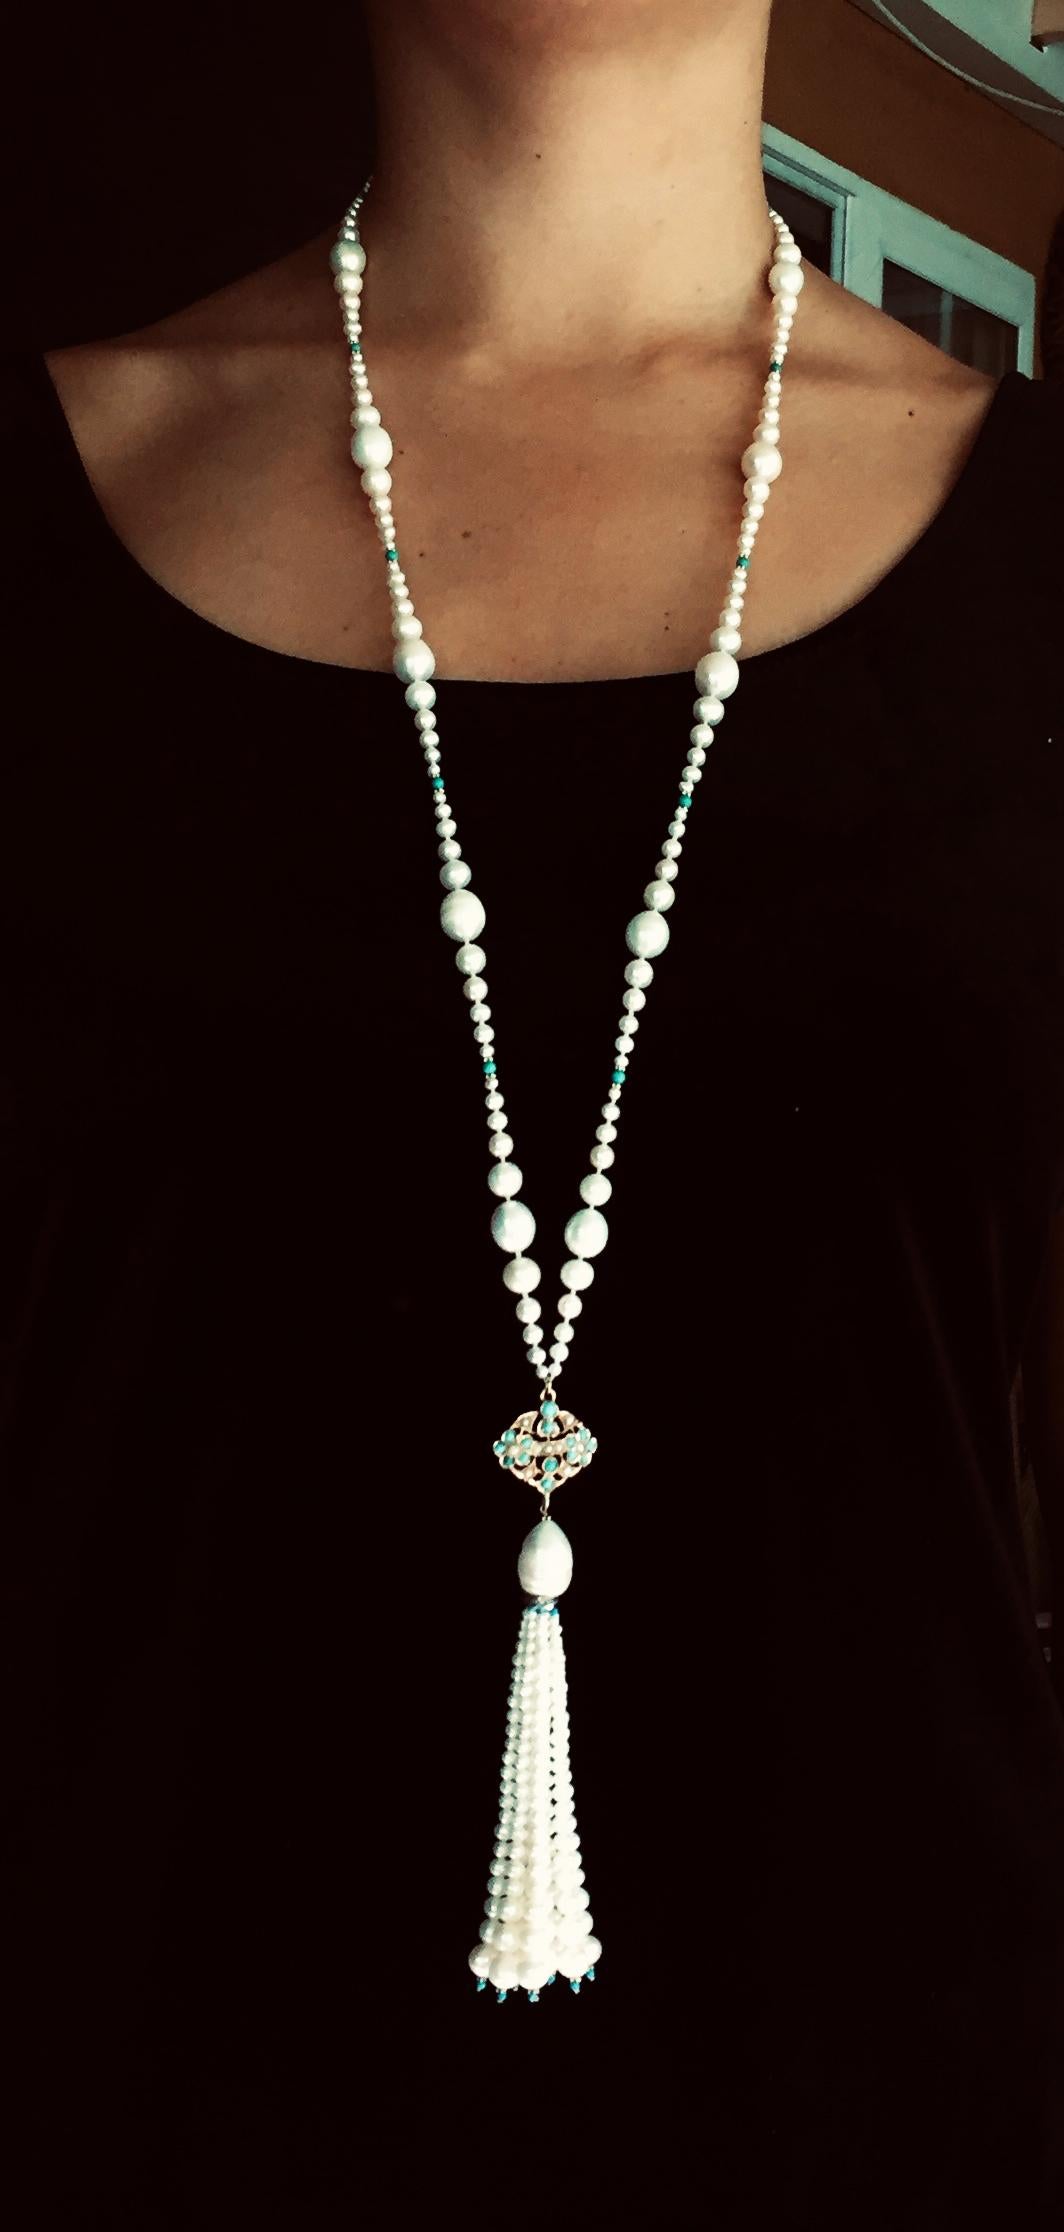 Marina J Pearl & Turquoise Necklace with 14k Gold Vintage Pendant, Beads & Clasp 6